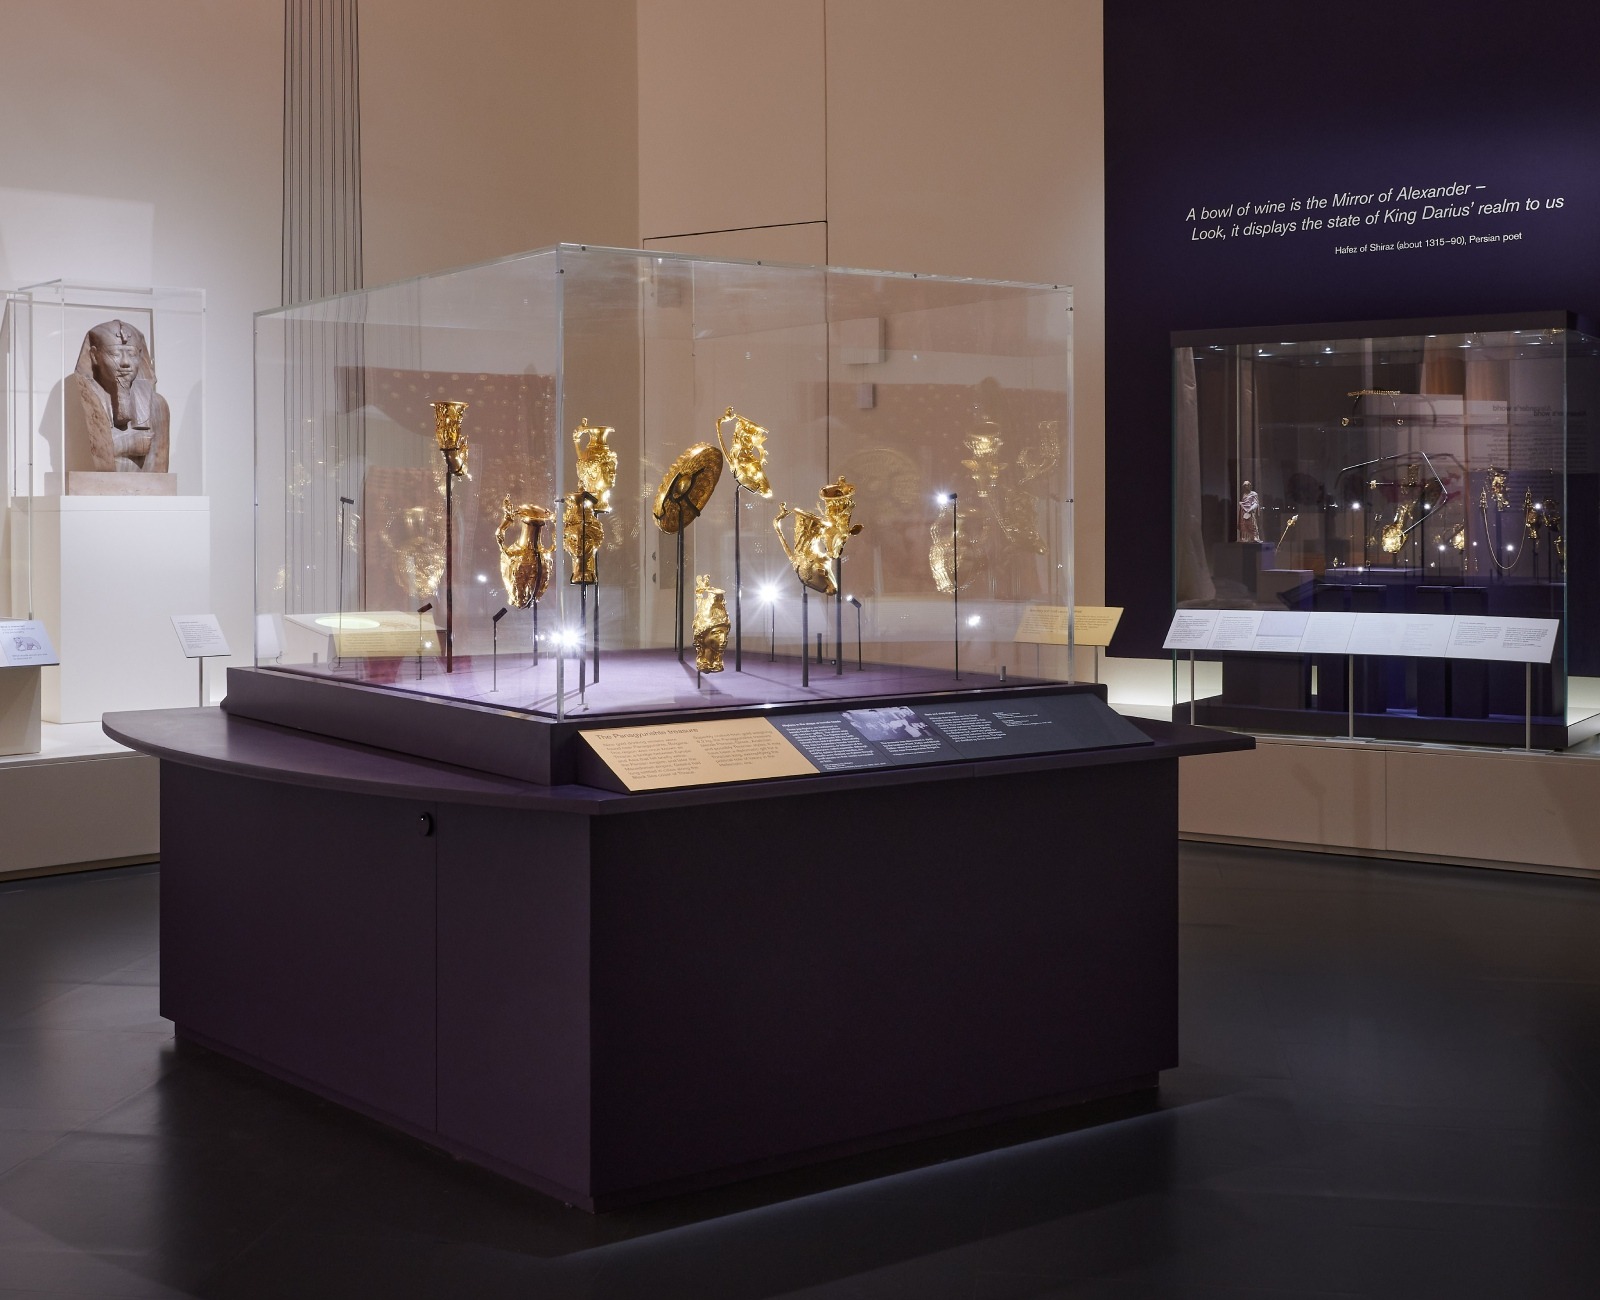 luxury and power - the British museum - gallery - The Real Greek